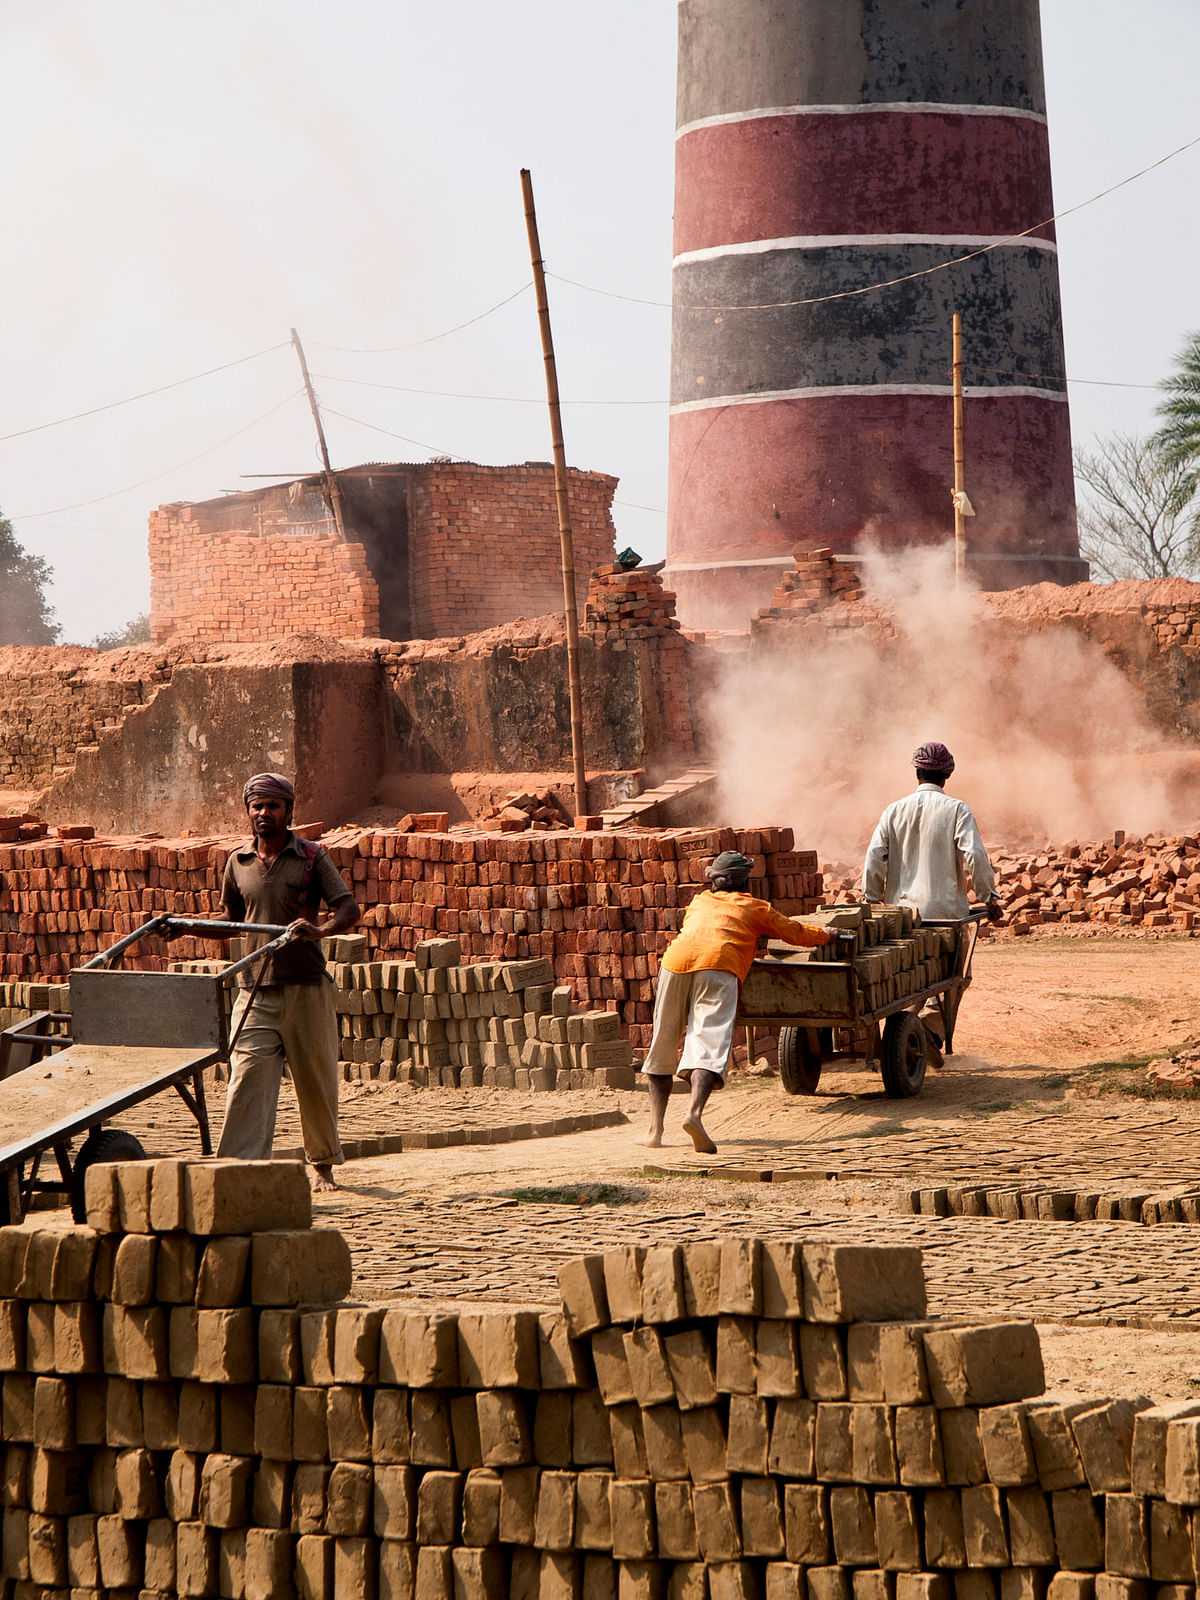 Debt bondage traps numerous labourers  who are trafficked to brick kilns to perpetuate Indian construction industry.